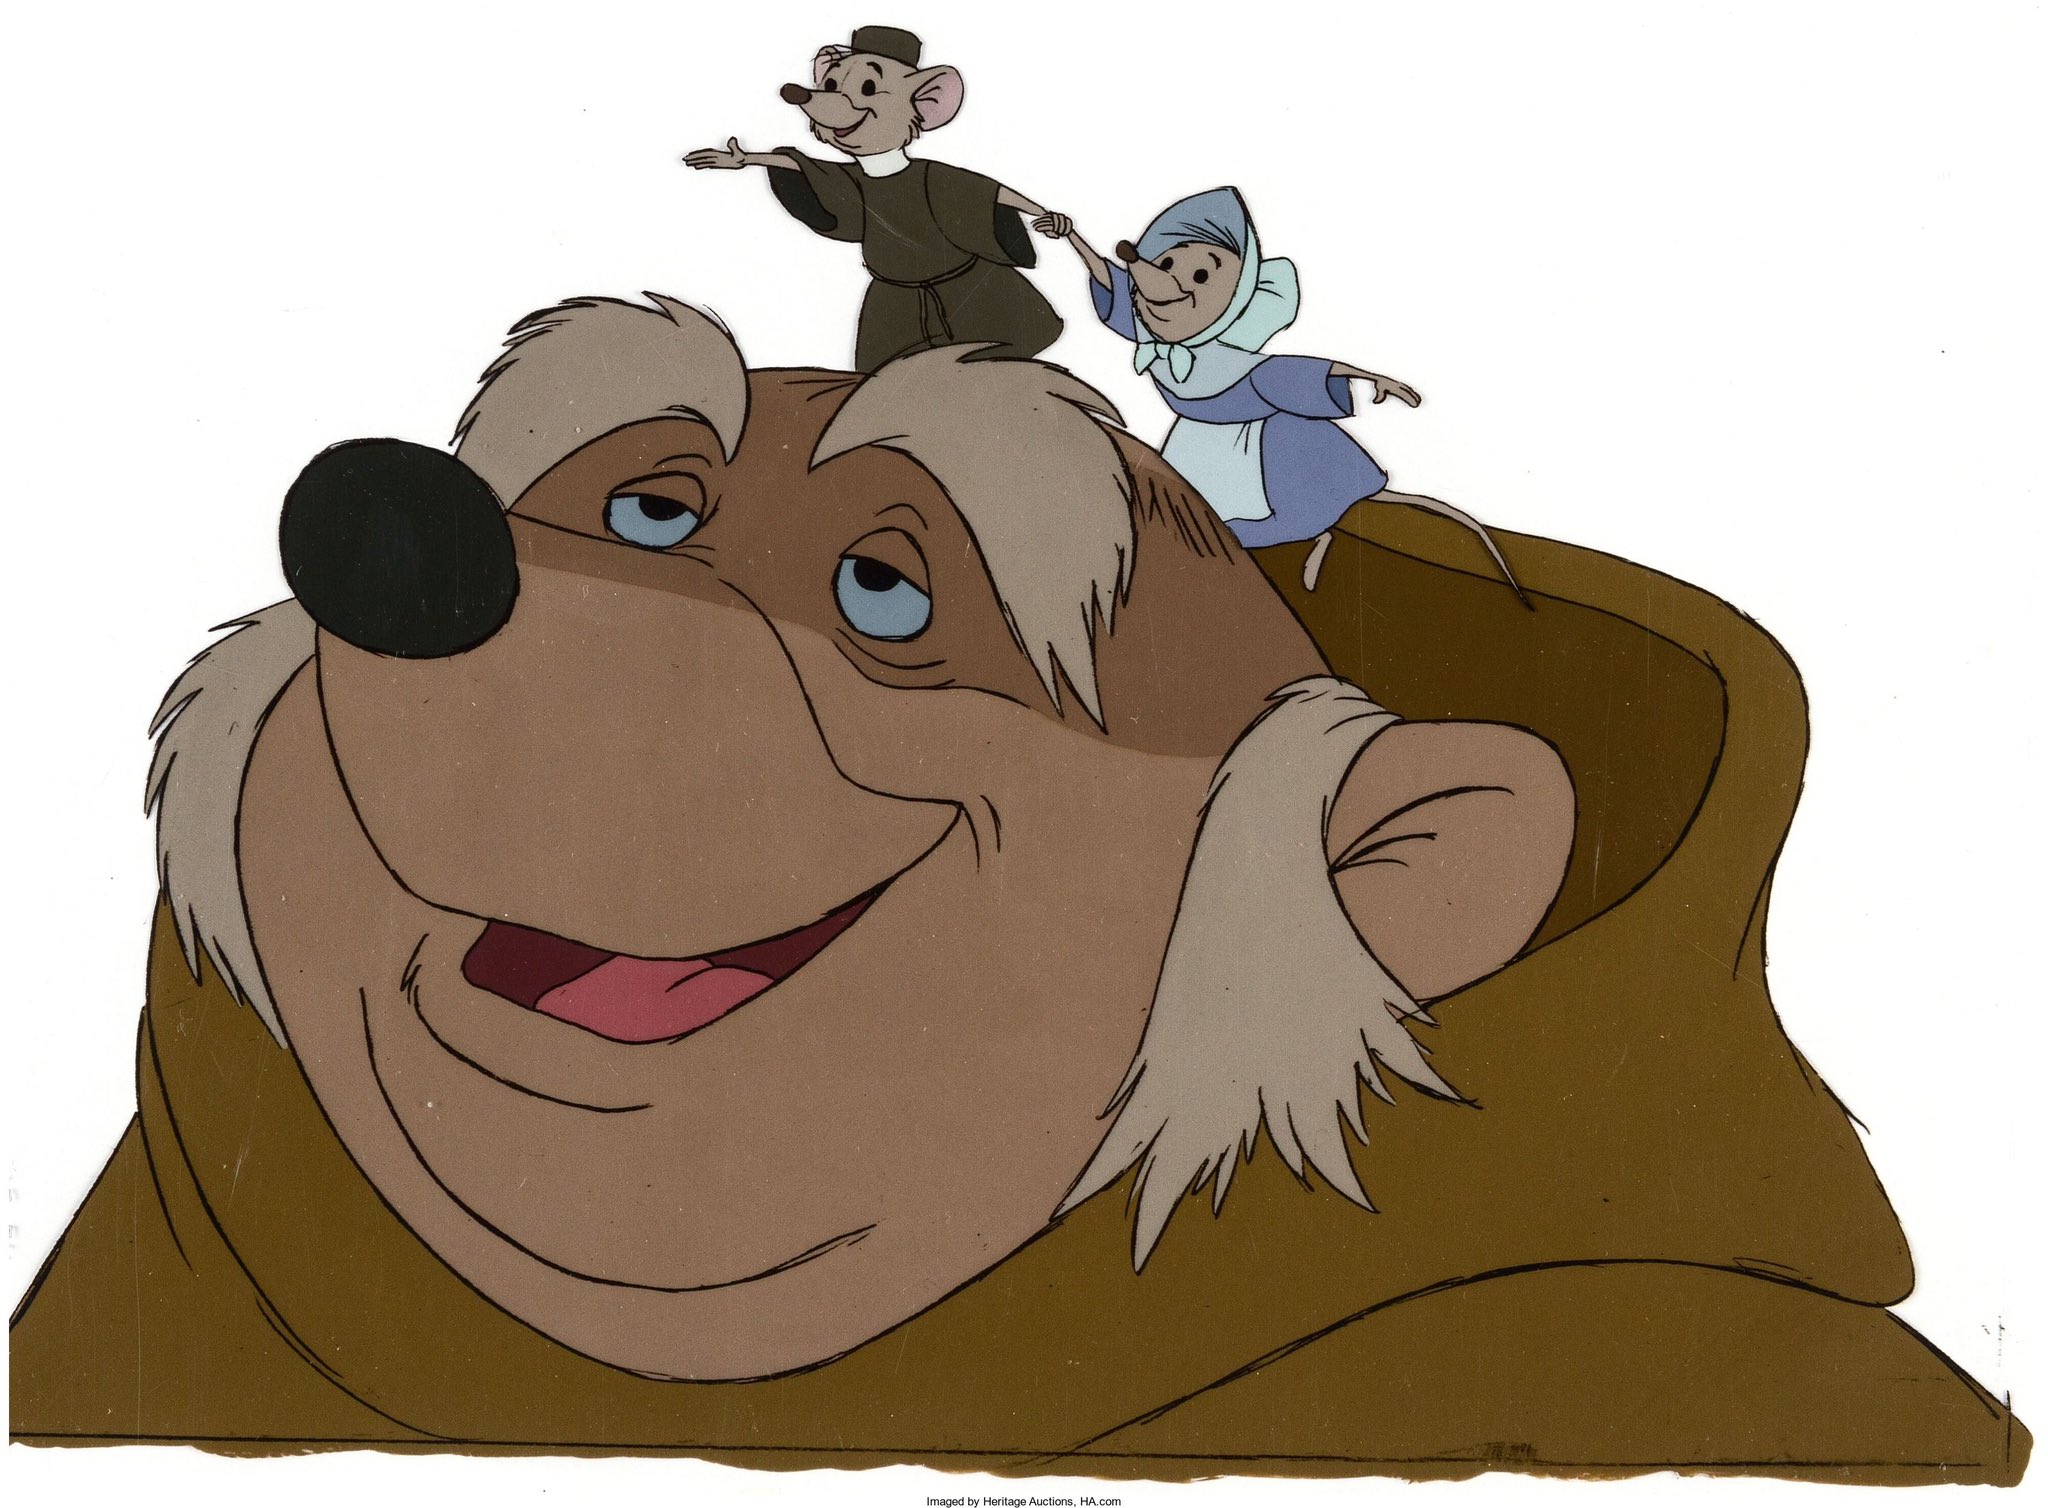 Jesse Nigro on X: "Can you imagine a modern kids movie portraying such  explicitly traditional, Christian characters in a completely positive light  as Friar Tuck and the church mice from Disney's Robin